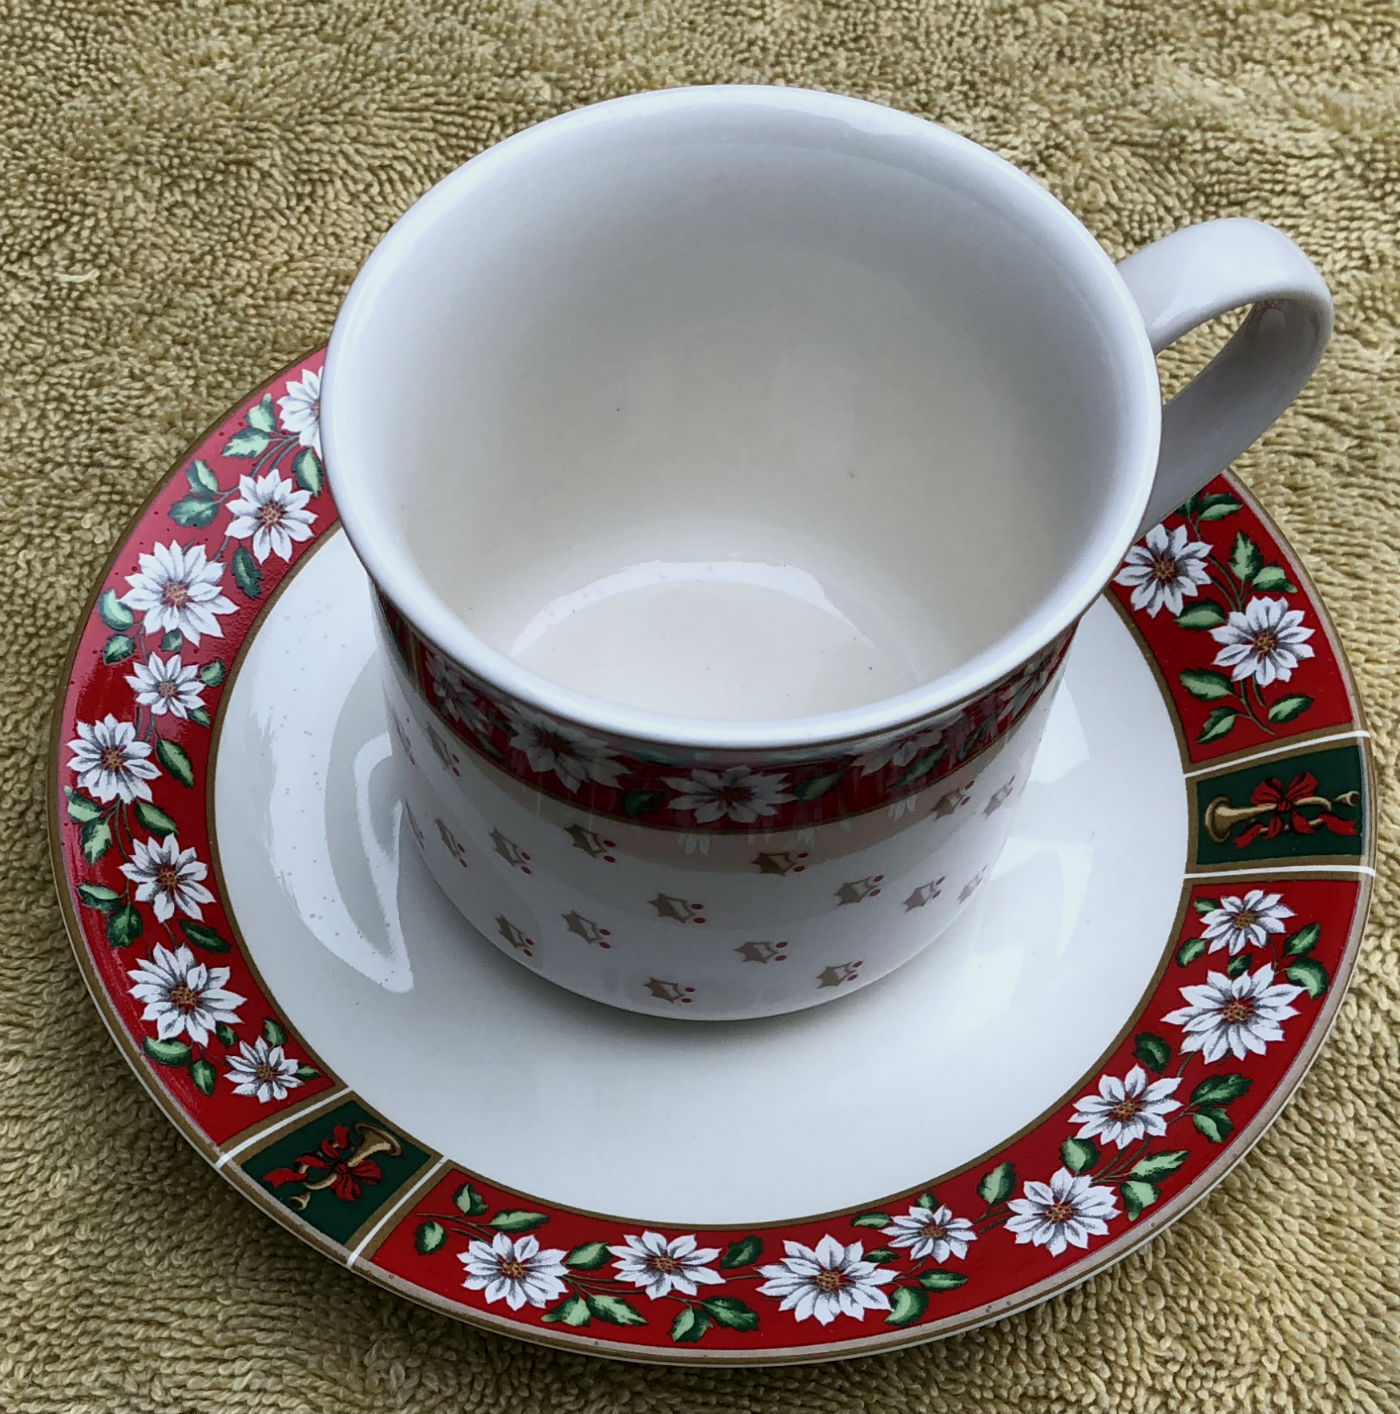 Charlton Hall Japan cups and saucers (8 each) - $64.00